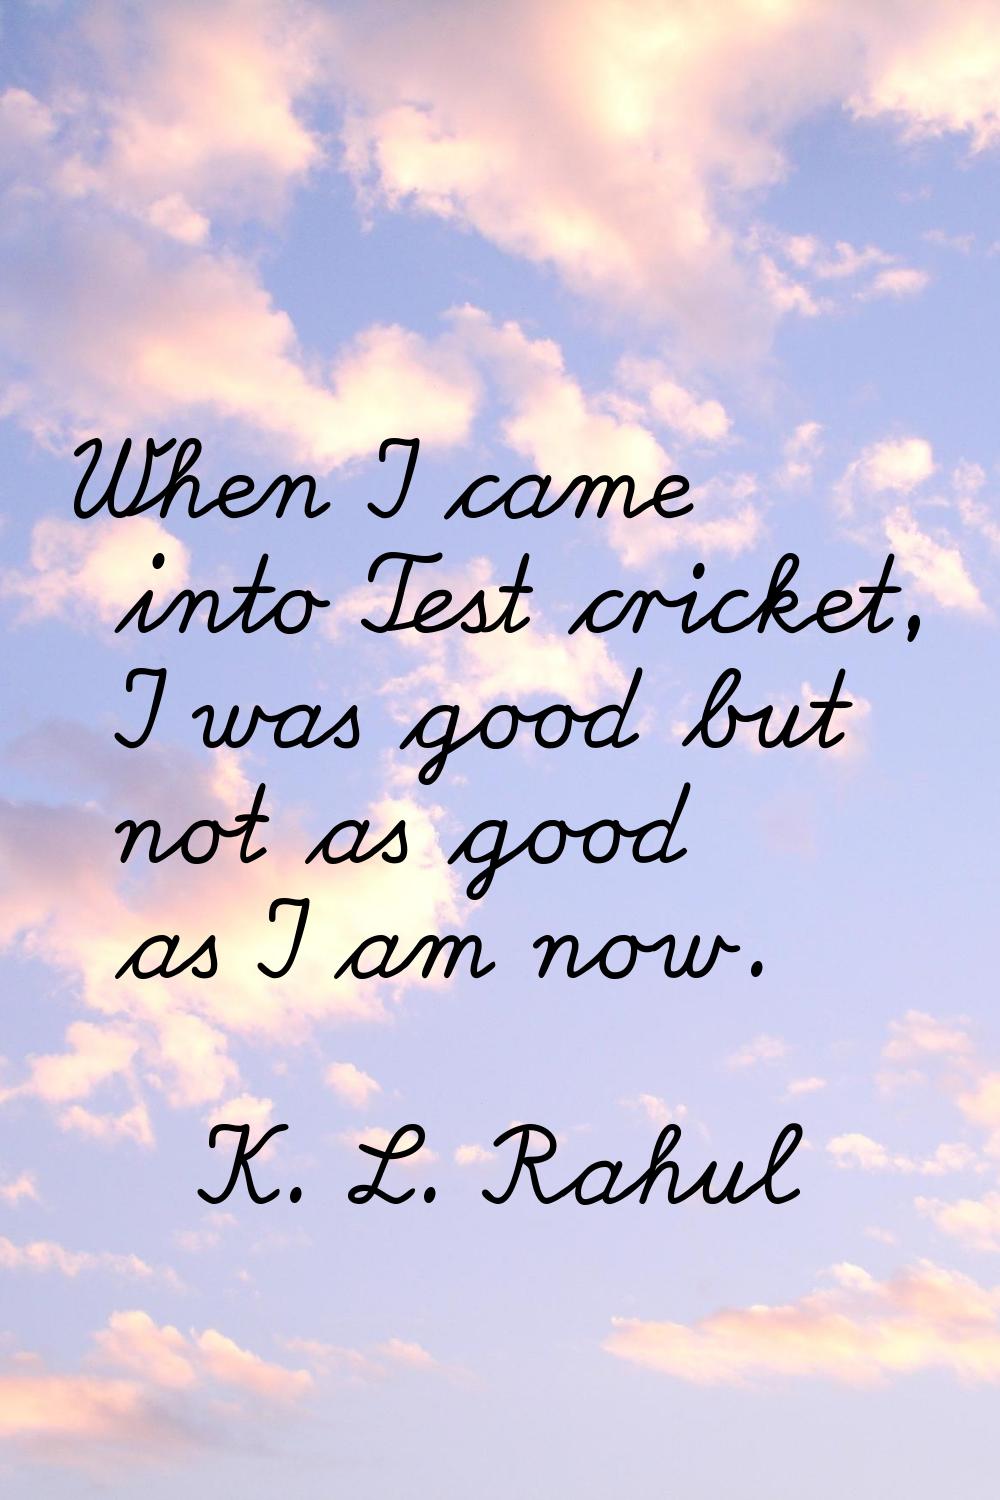 When I came into Test cricket, I was good but not as good as I am now.